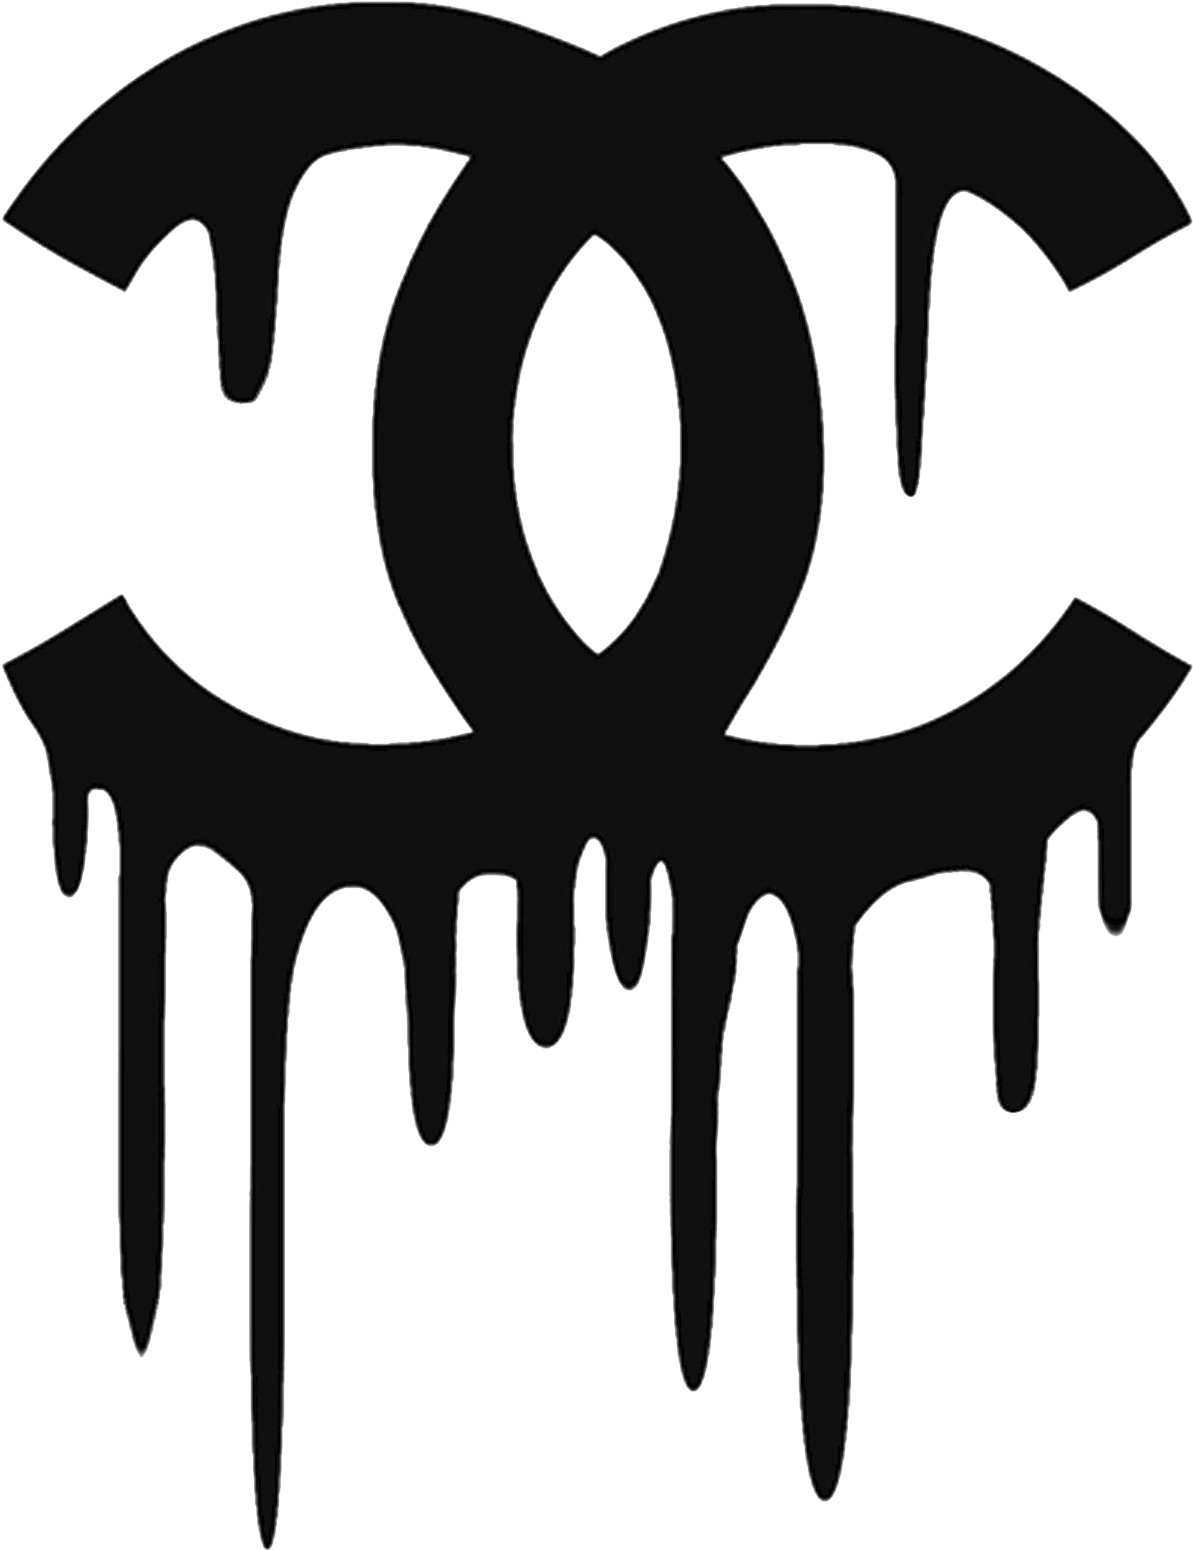 Transparent Tumblr Images Pictures - Coco Chanel Logo (1237x1600)